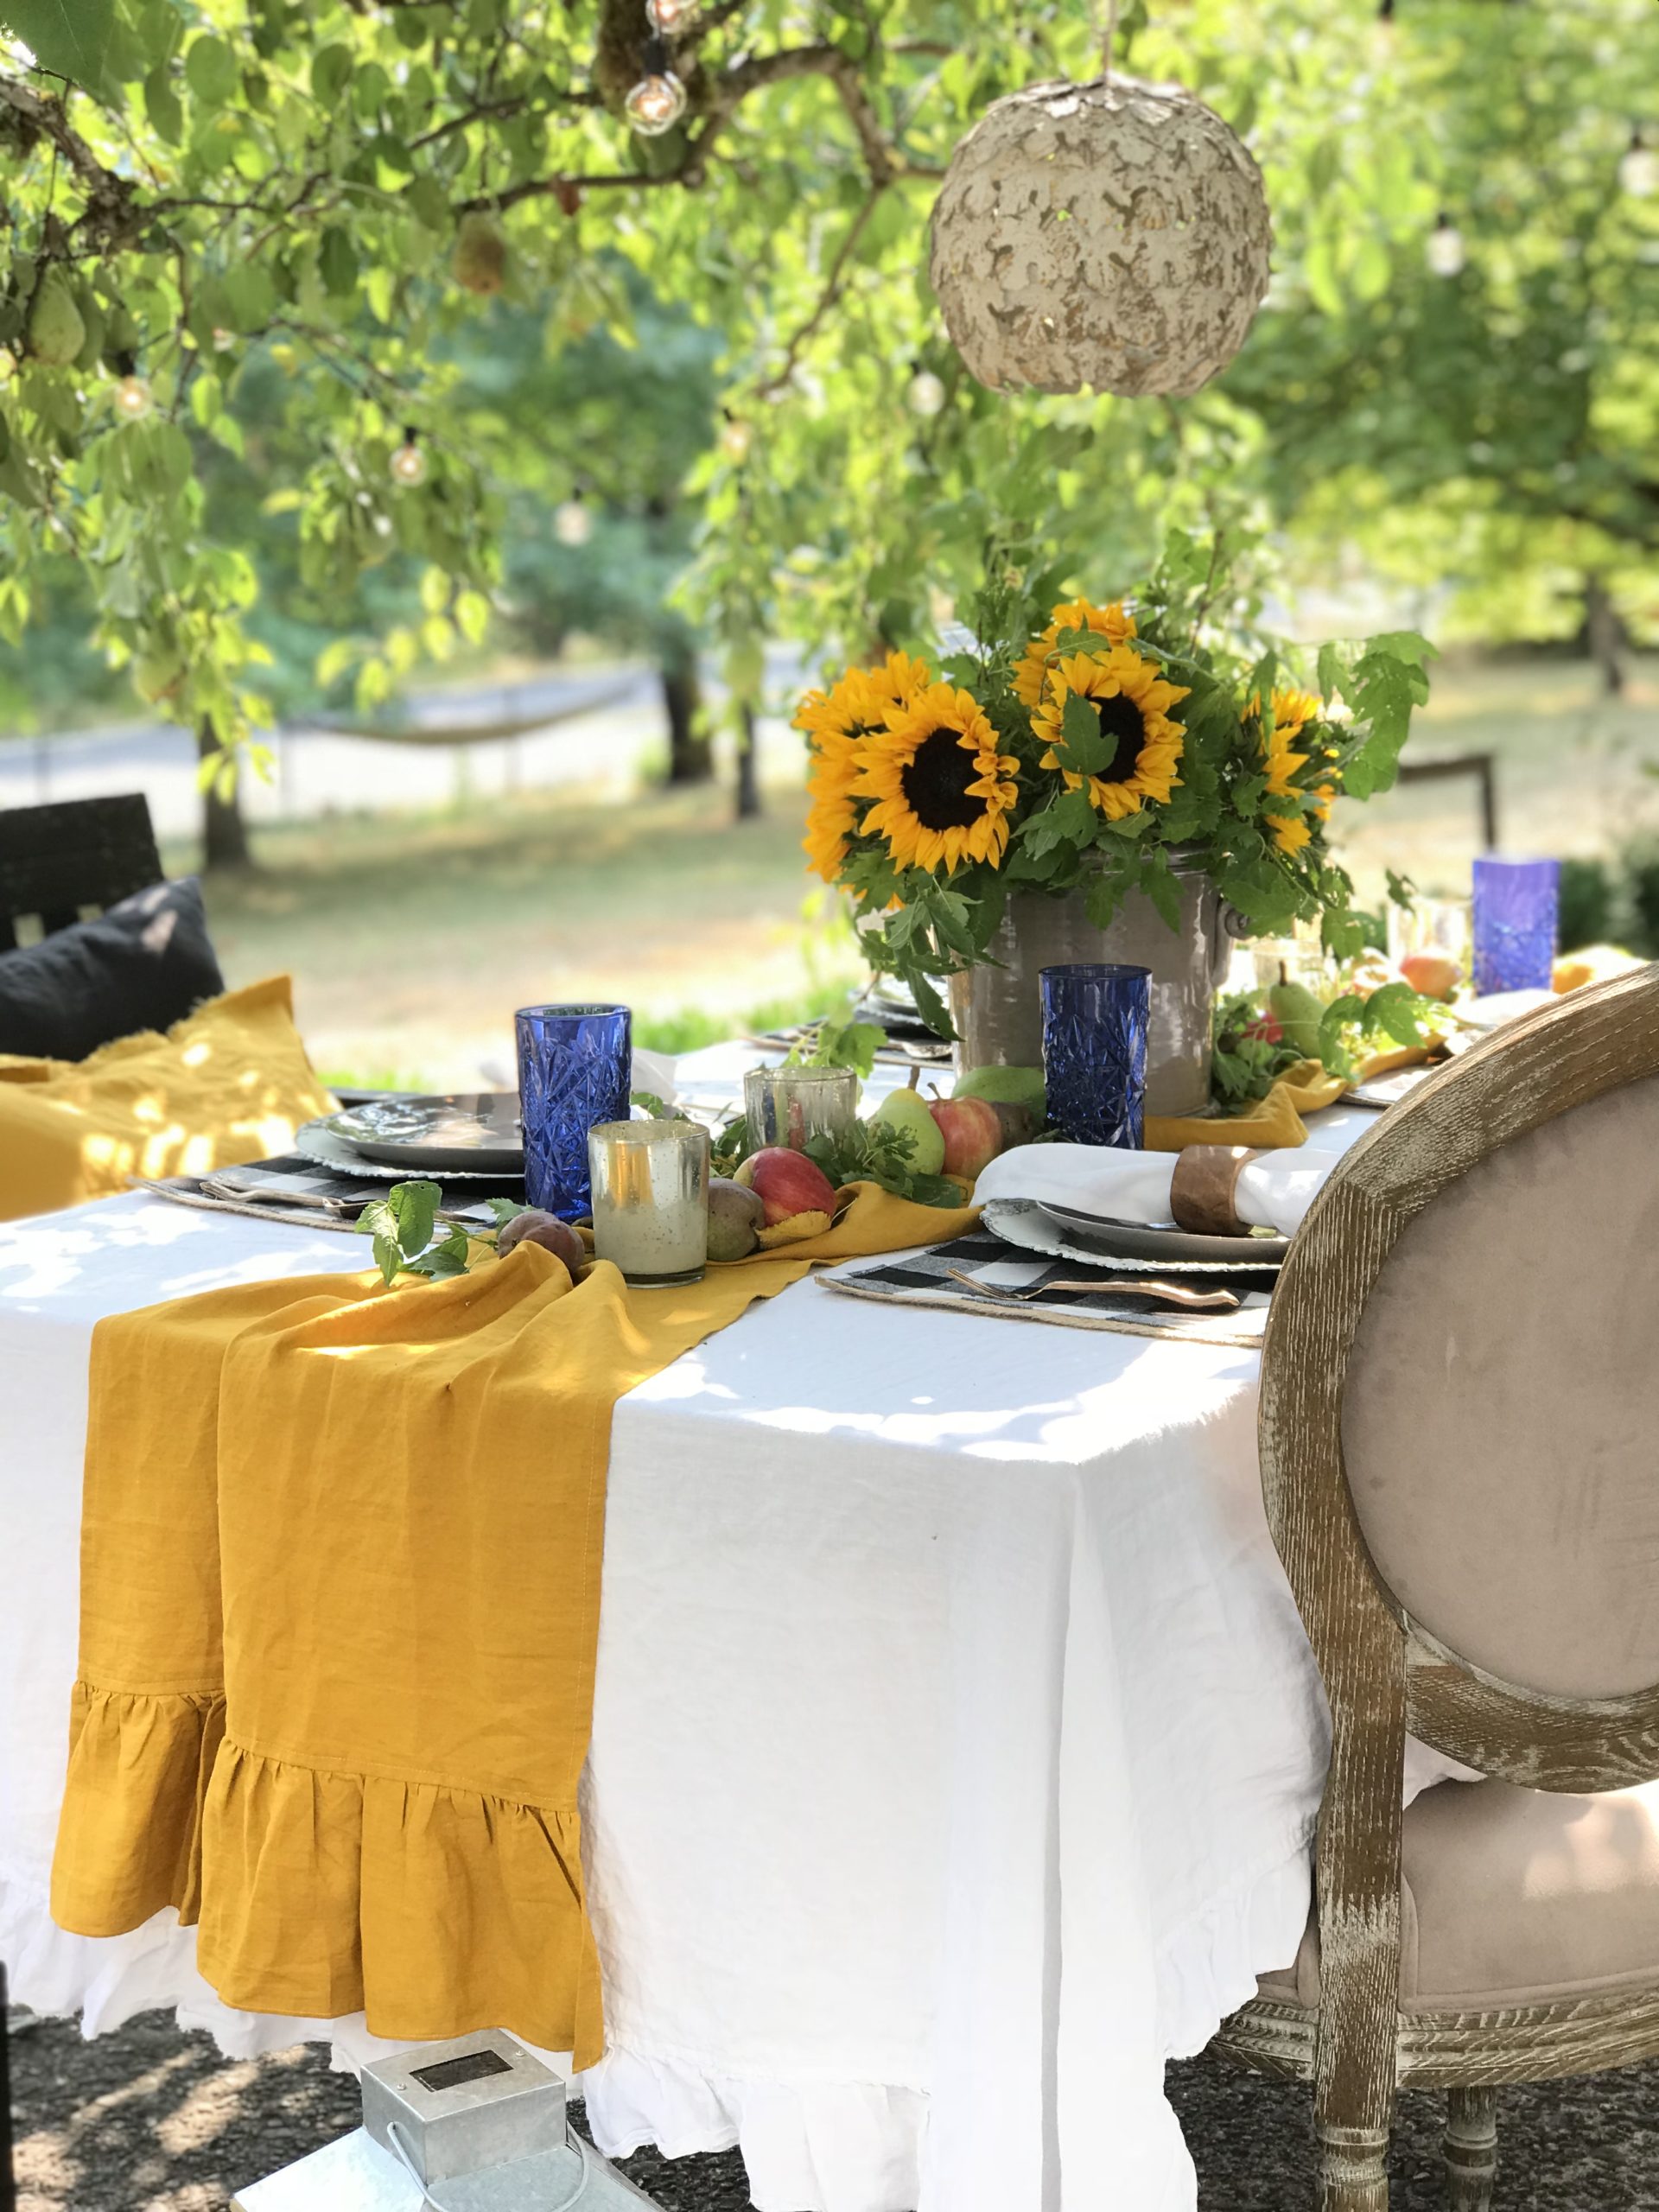 How to Decorate Your Fall Table in the Garden with yellow table runner and sunflower centerpiece